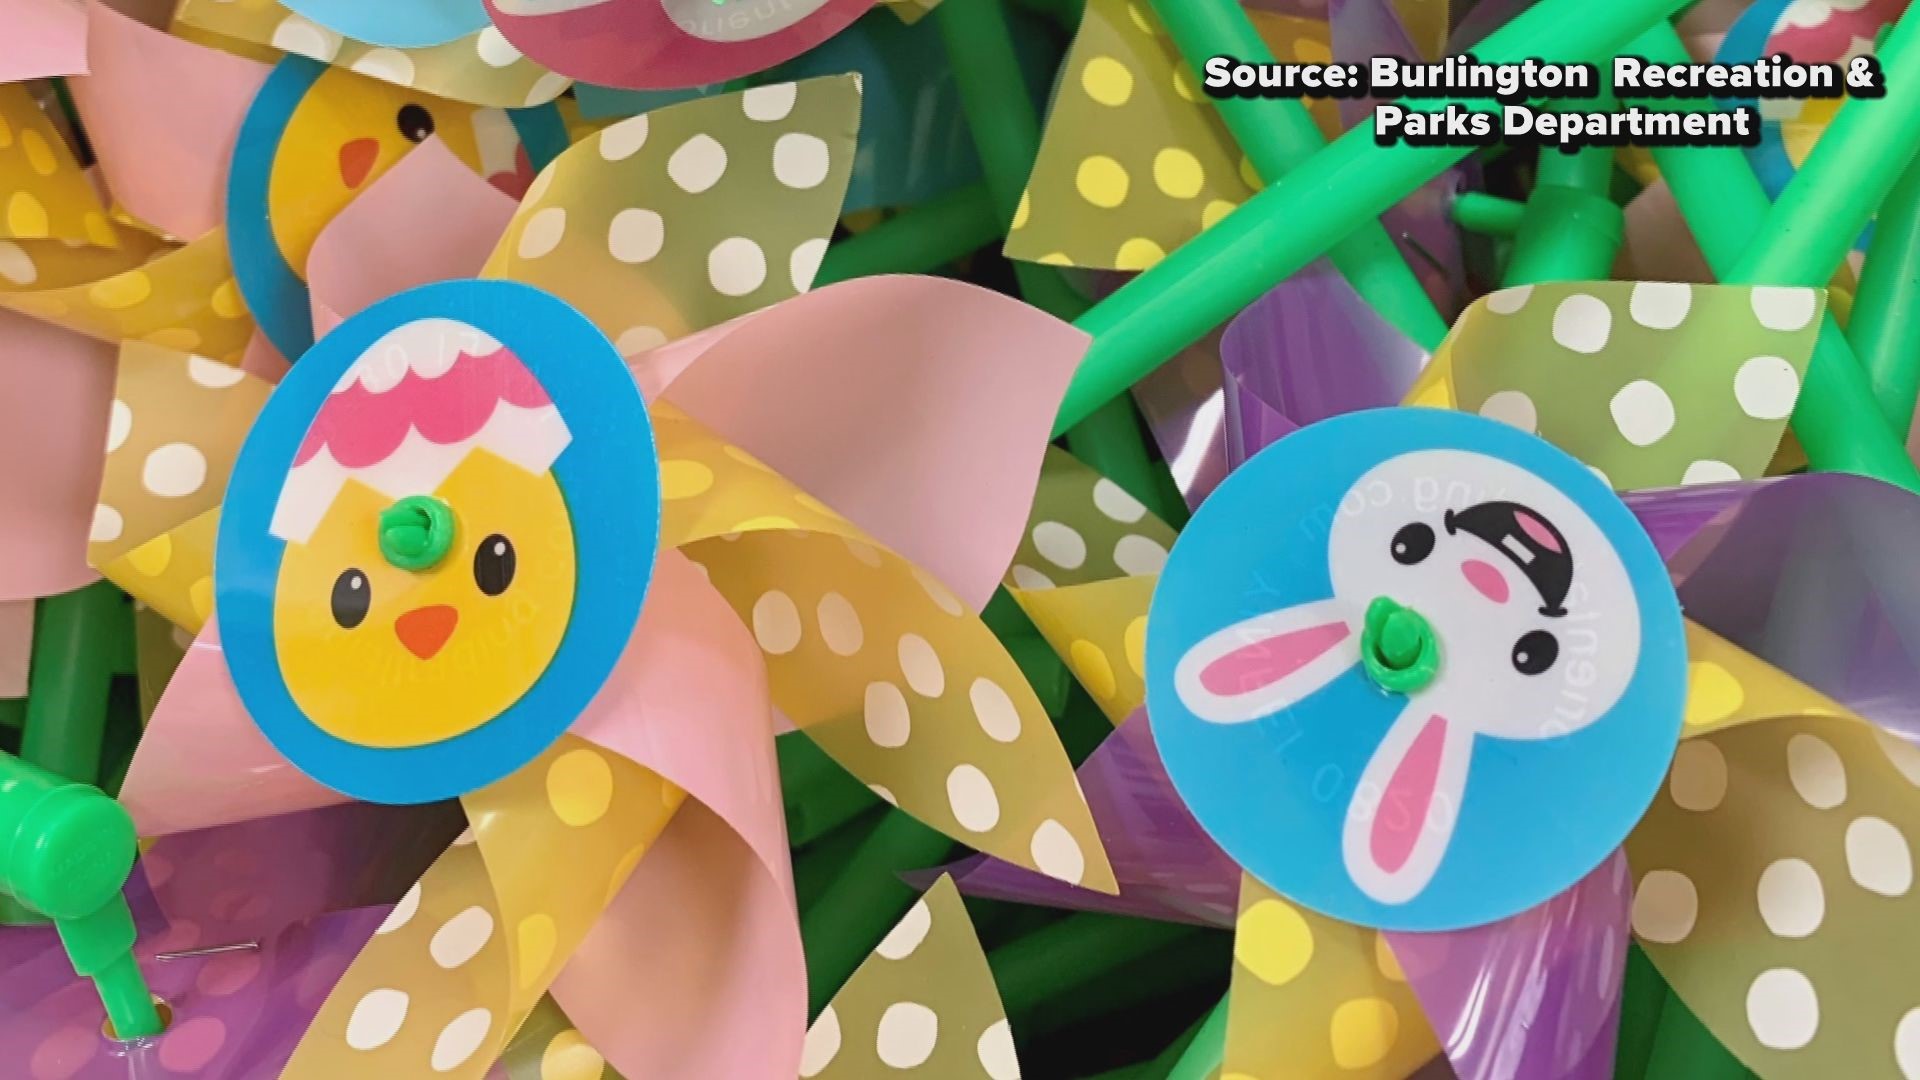 It's a safe and fun way to celebrate Easter with the kids this year.